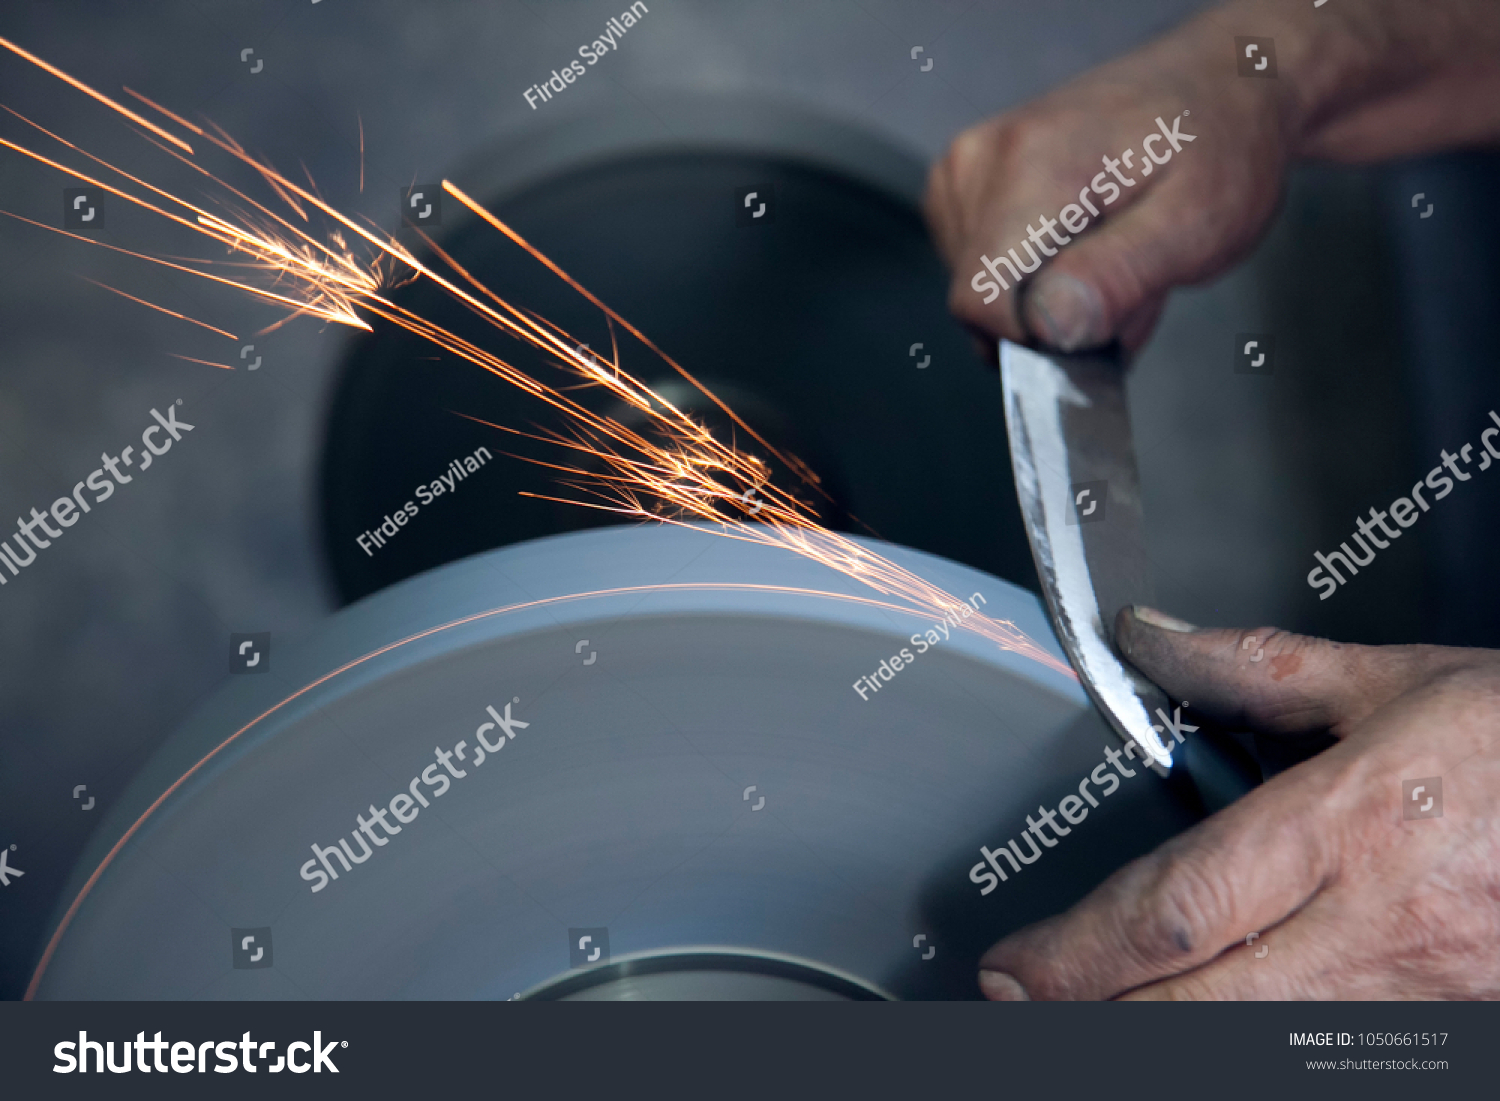 Knife sharpener and hand with blade on  table, closeup #1050661517